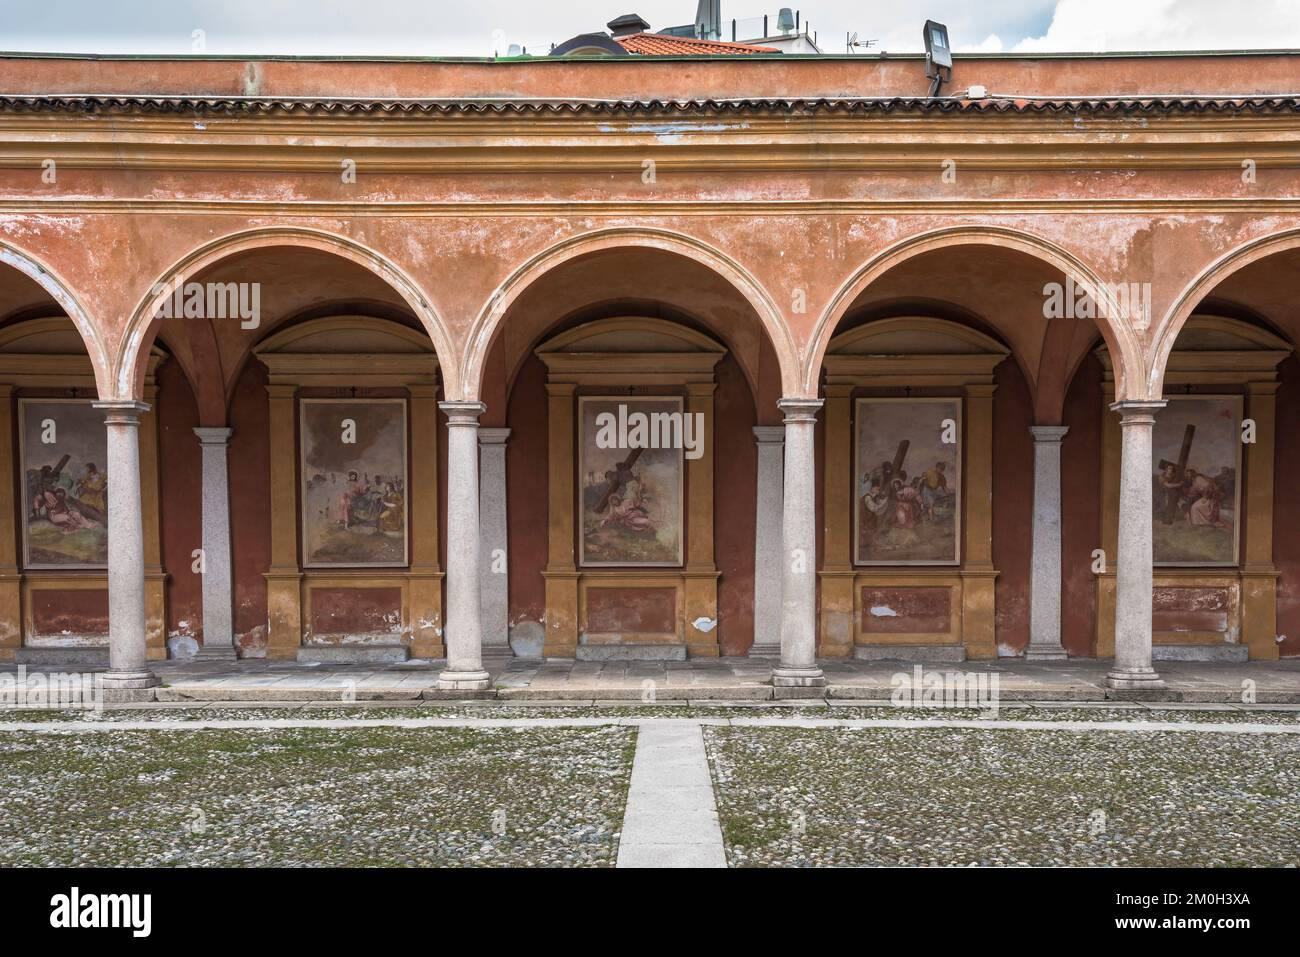 Renaissance arcade, view of a section of the Renaissance era Cloister of the Church of SS Gervasio and Protasio in Baveno, Piedmonte, Italy, Stock Photo